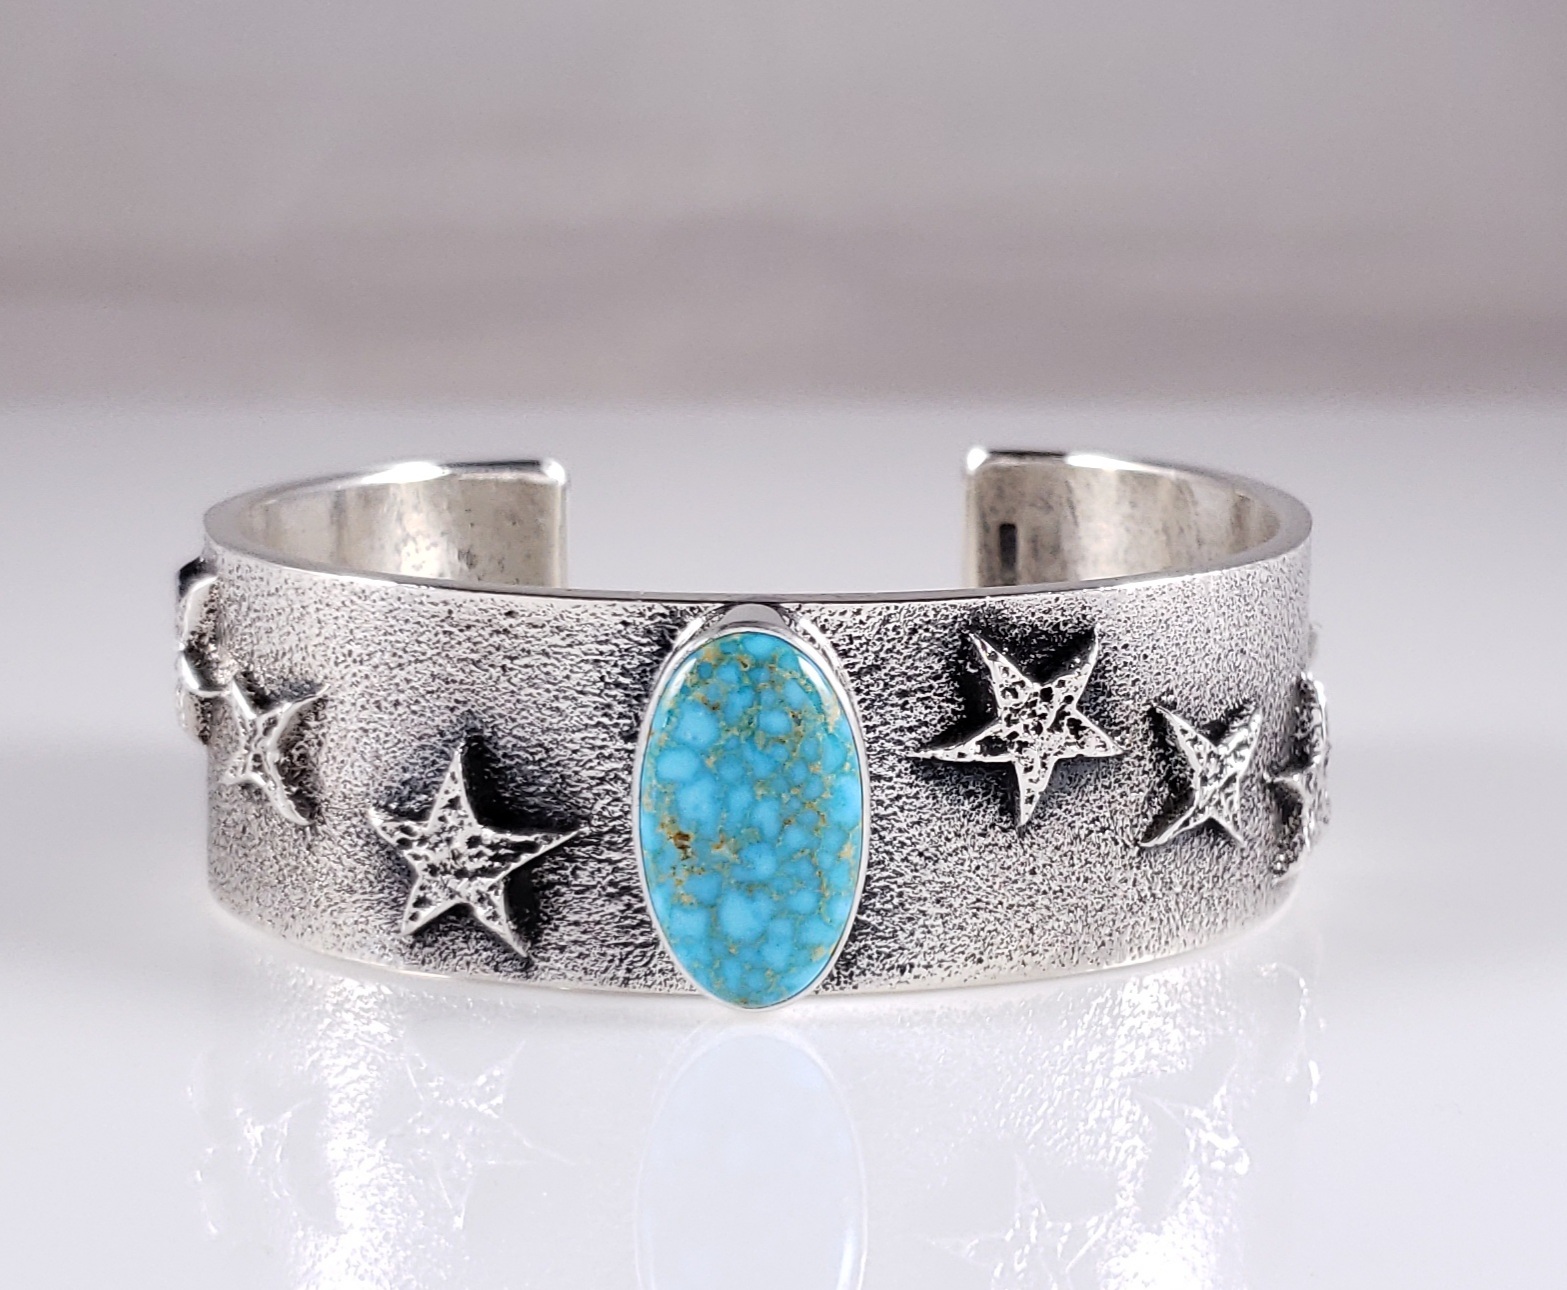 Personalized luxury bracelet with initial and turquoise – KBJewels555